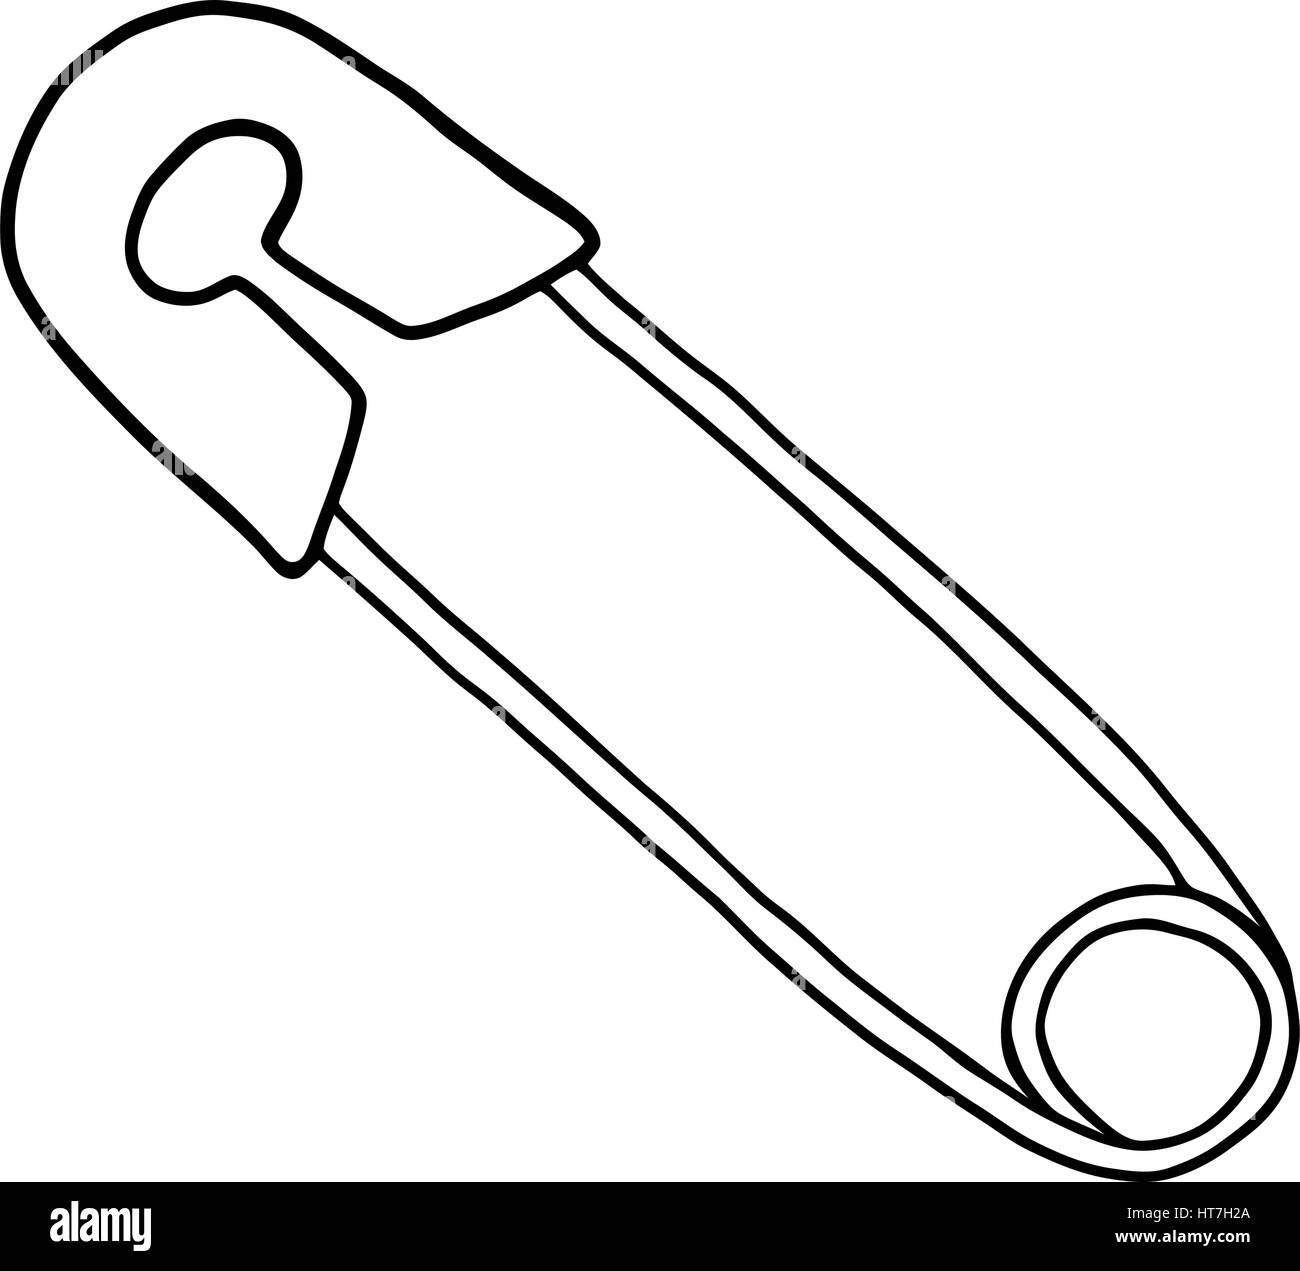 https://c8.alamy.com/comp/HT7H2A/isolated-clip-art-of-a-safety-pin-HT7H2A.jpg